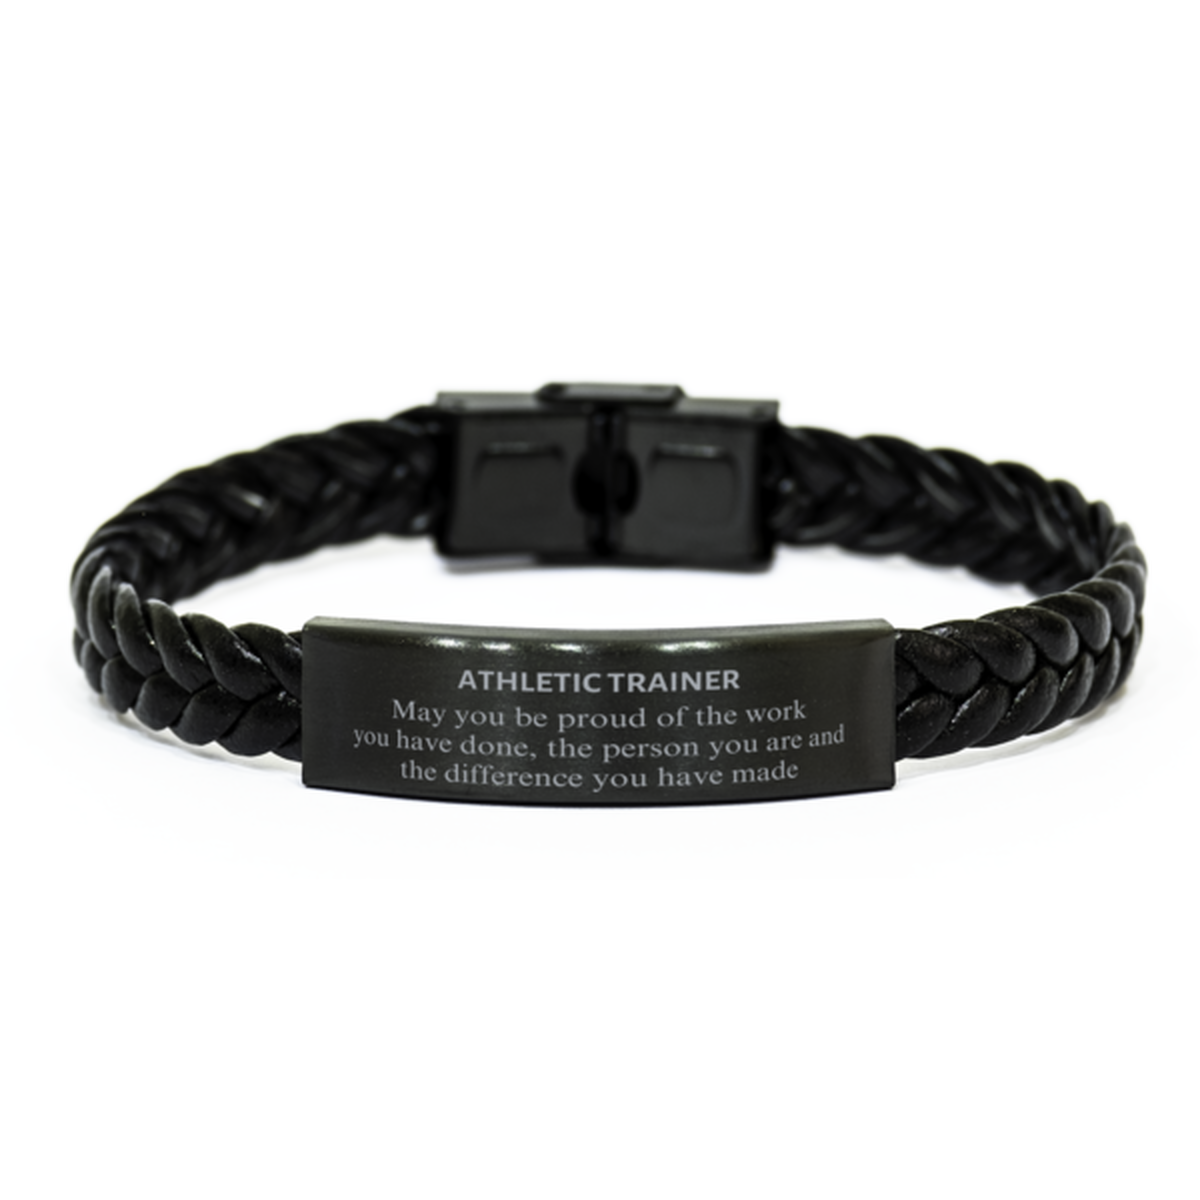 Athletic Trainer May you be proud of the work you have done, Retirement Athletic Trainer Braided Leather Bracelet for Colleague Appreciation Gifts Amazing for Athletic Trainer